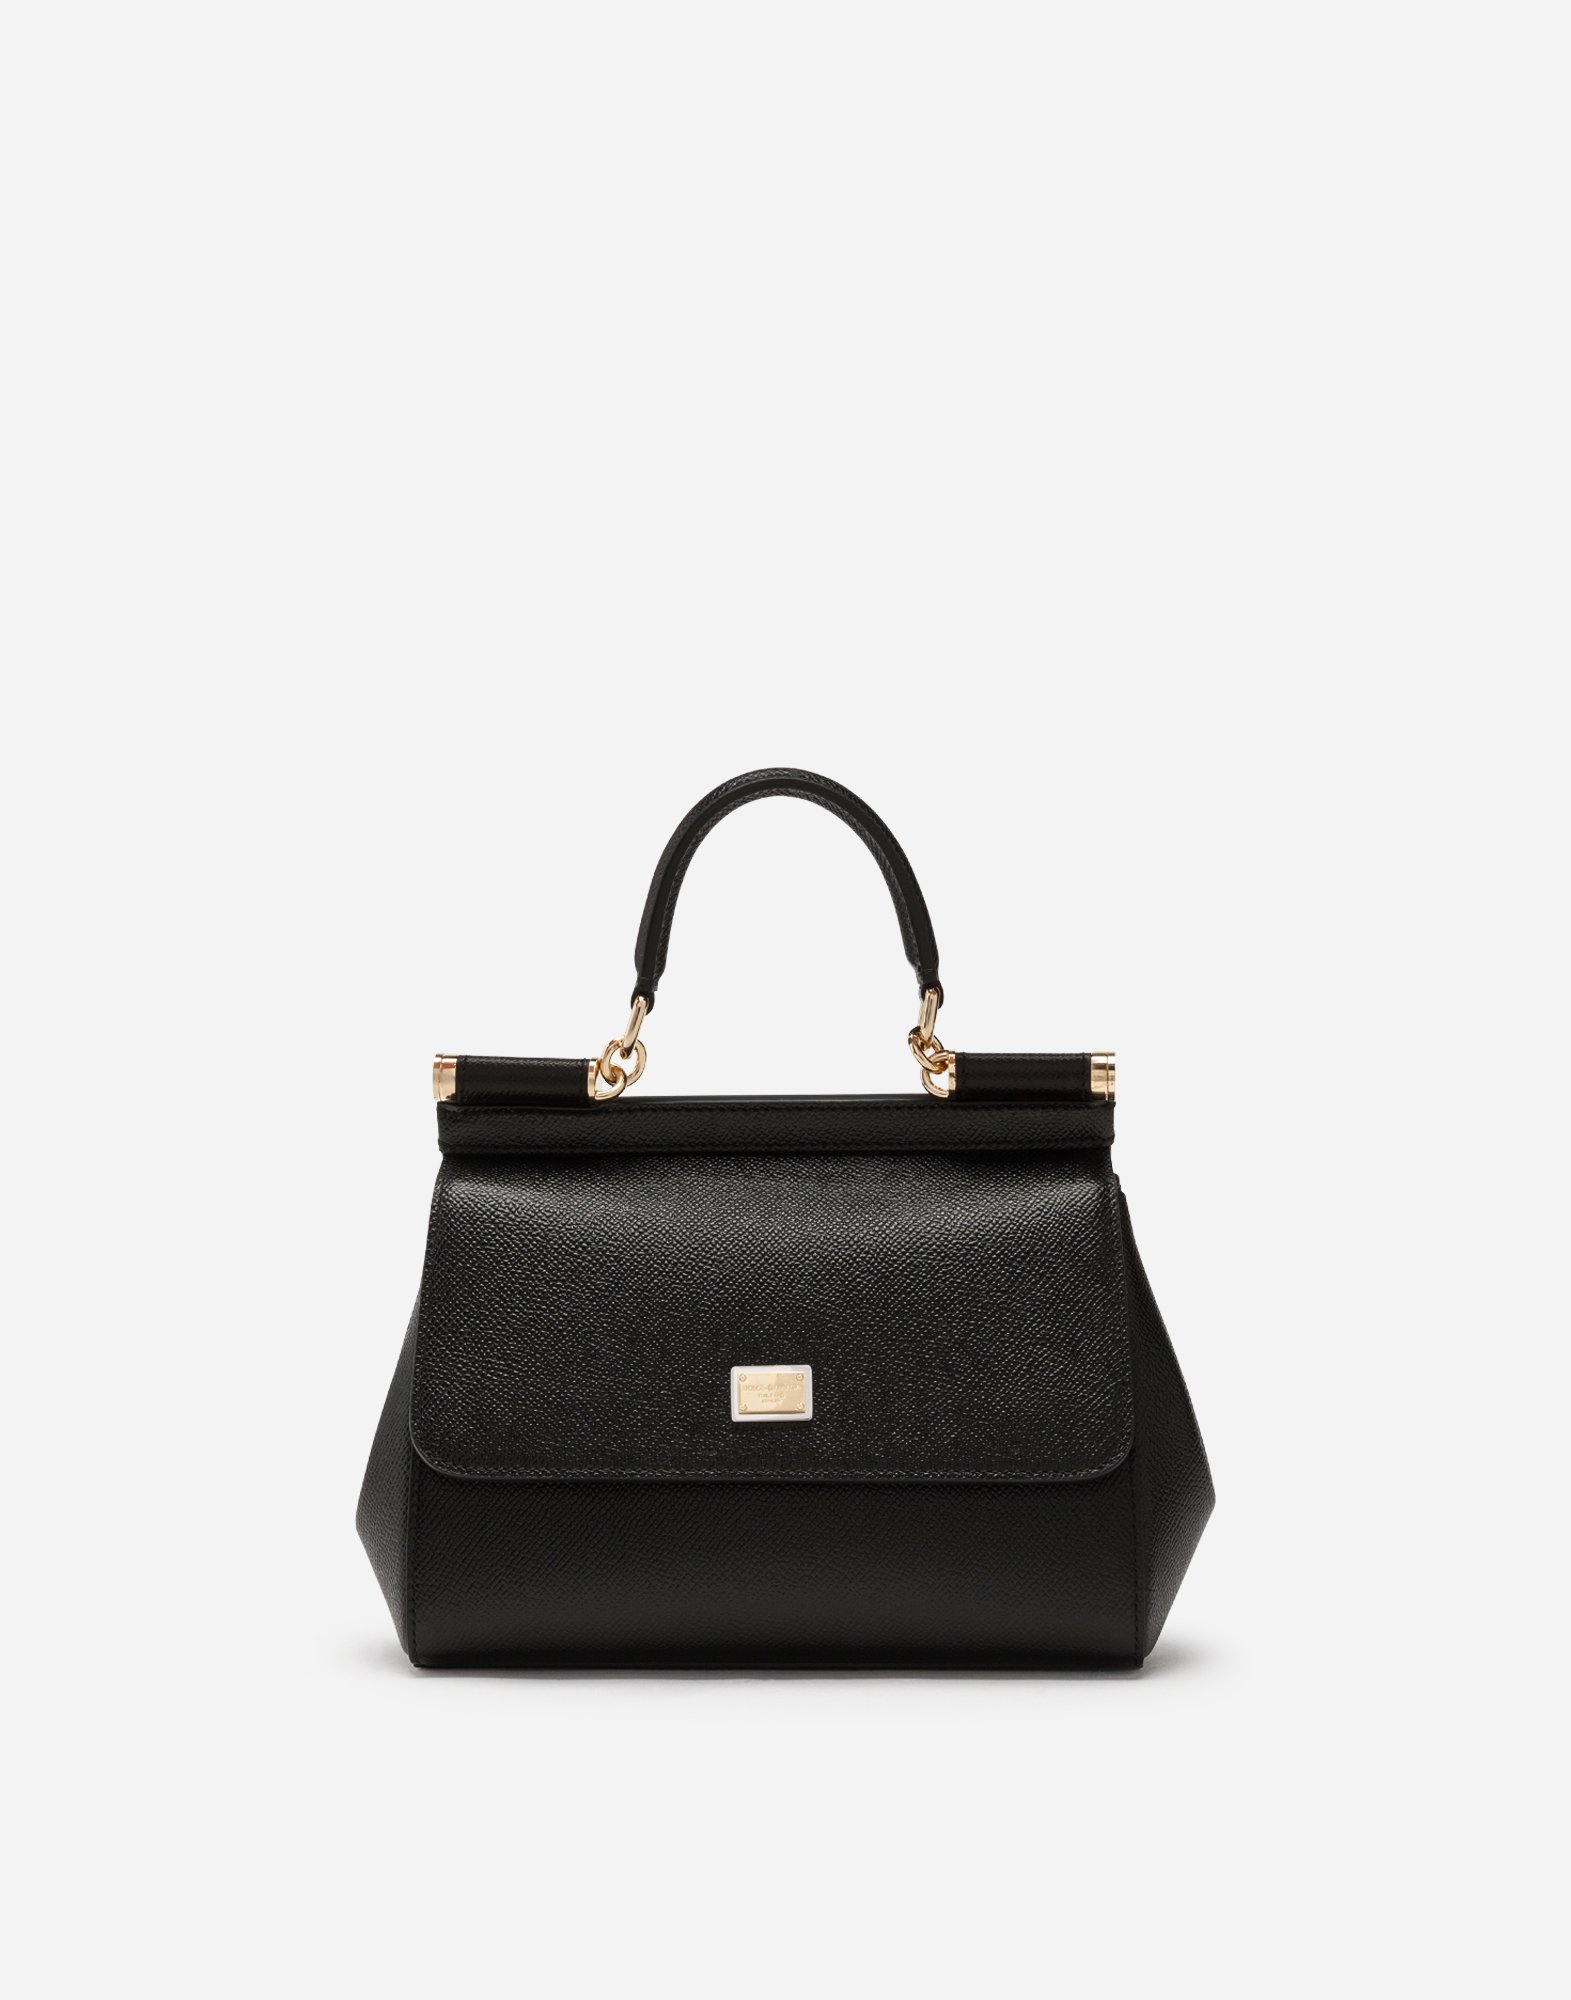 dolce and gabbana small bag